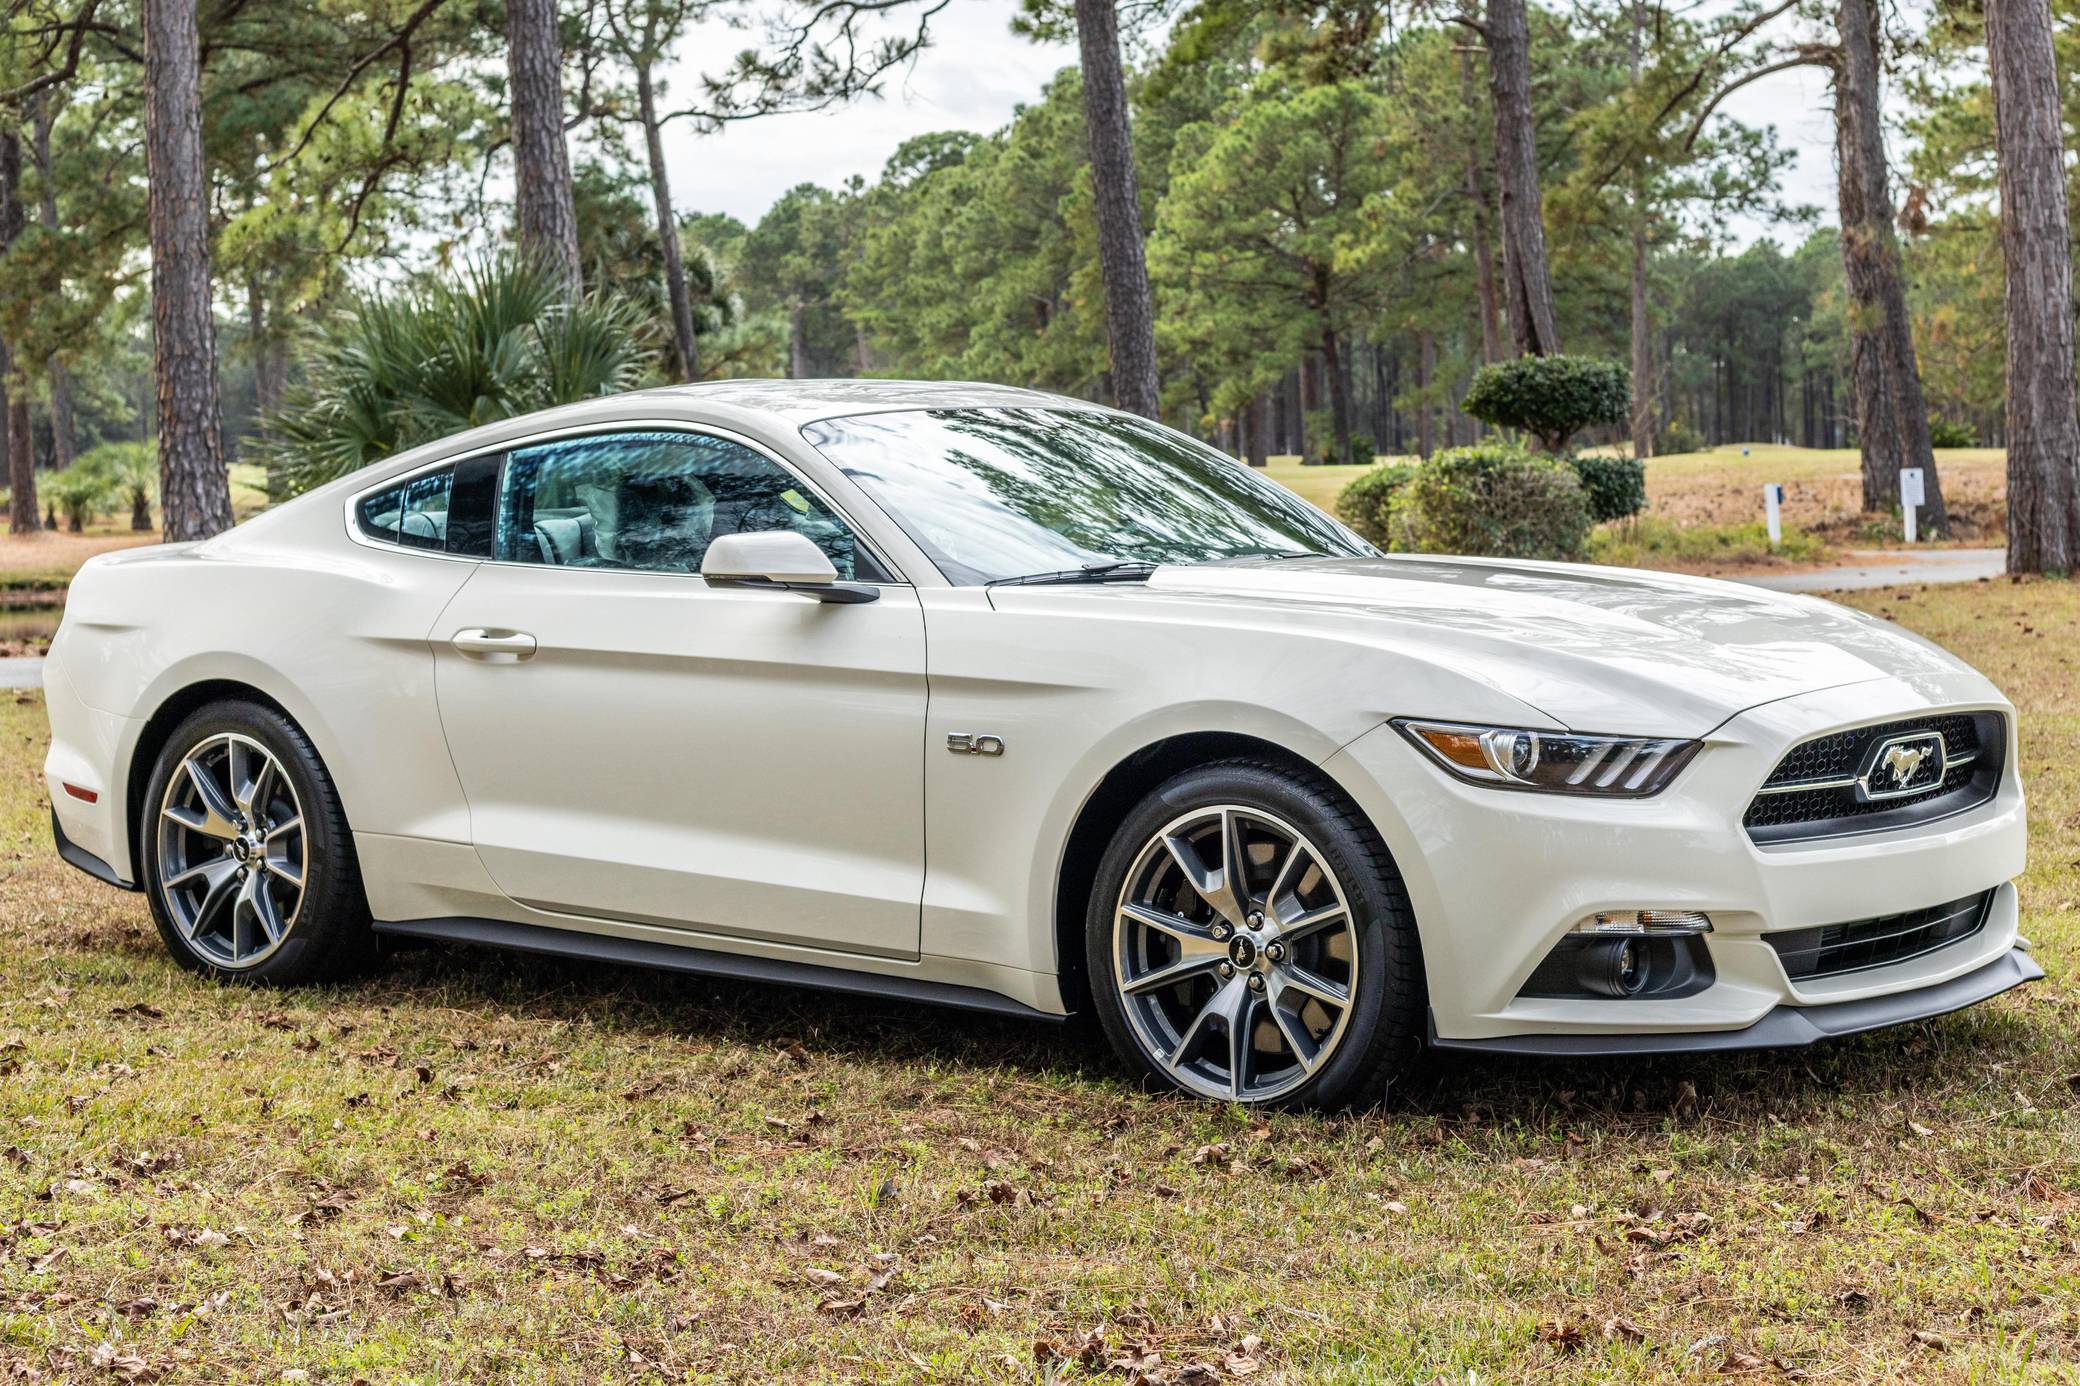 S650 Mustang 60th Anniversary Edition? 1694209033013